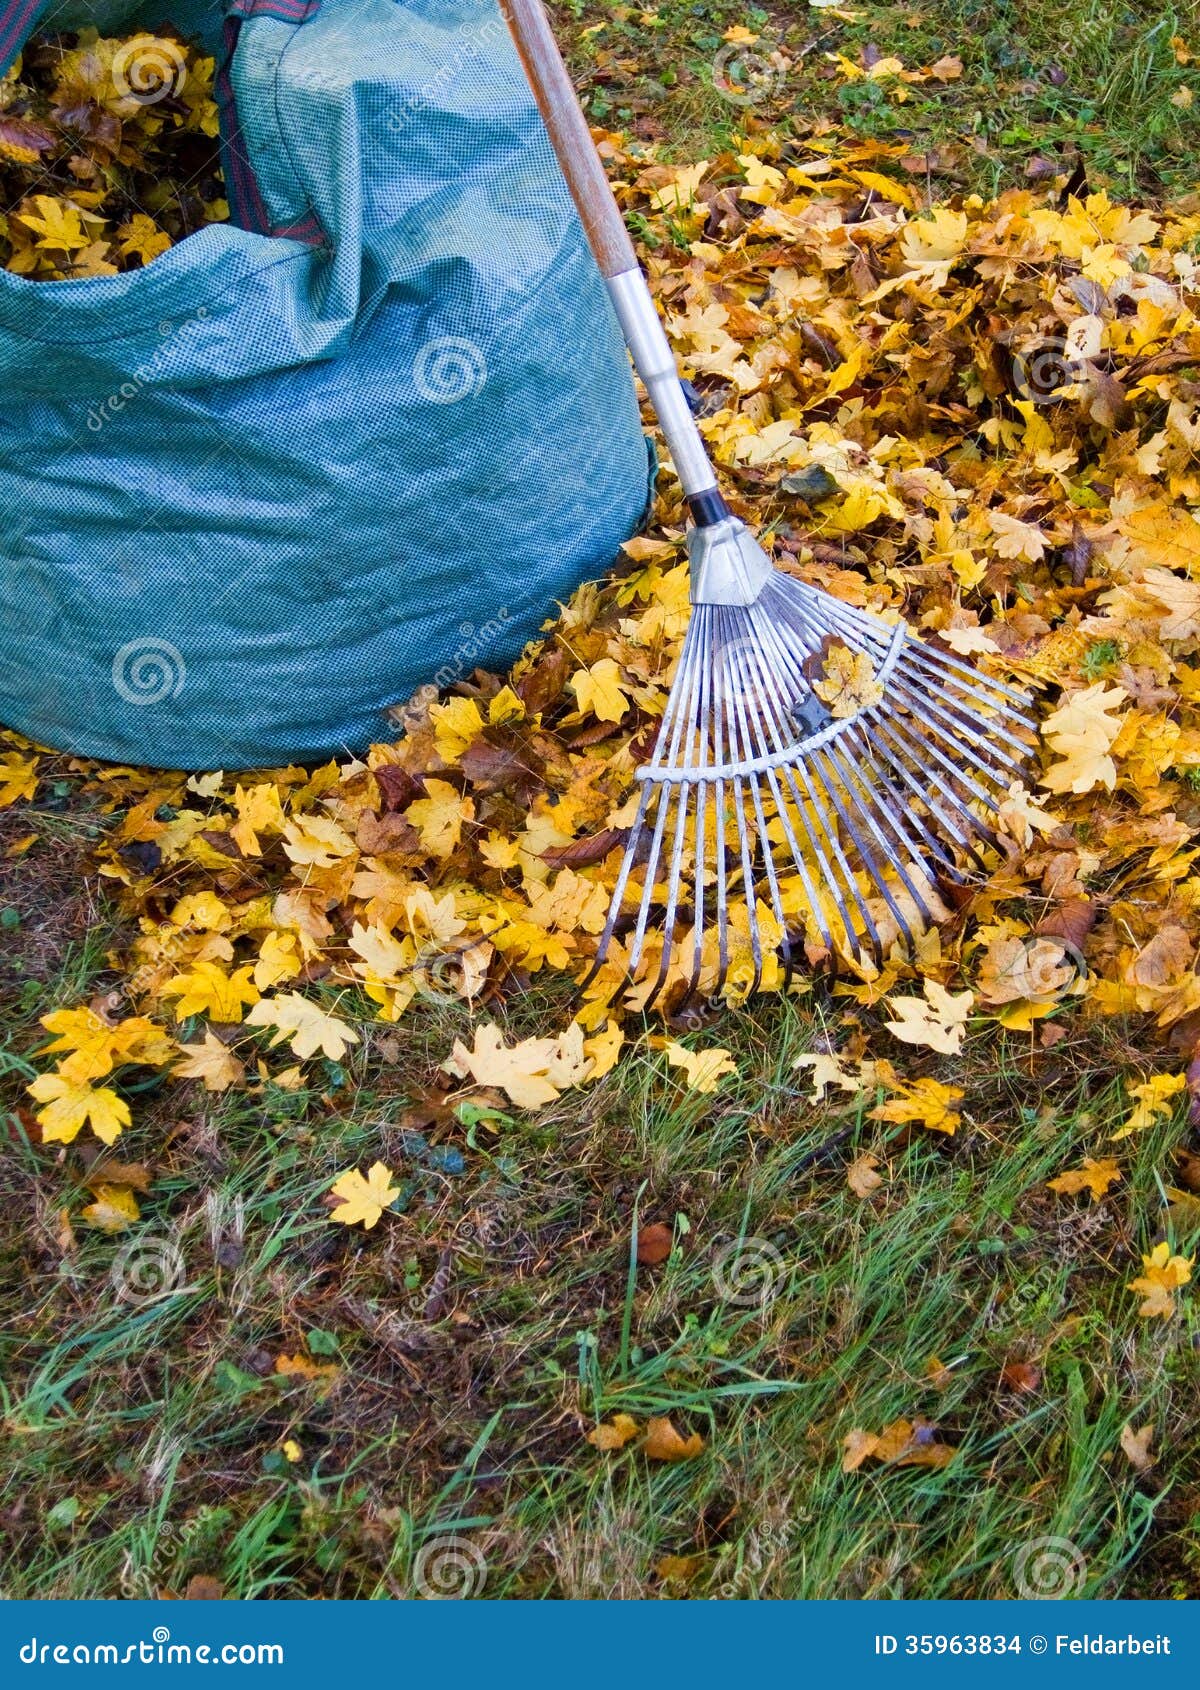 Fall leaves stock photo. Image of fall, background, race - 35963834